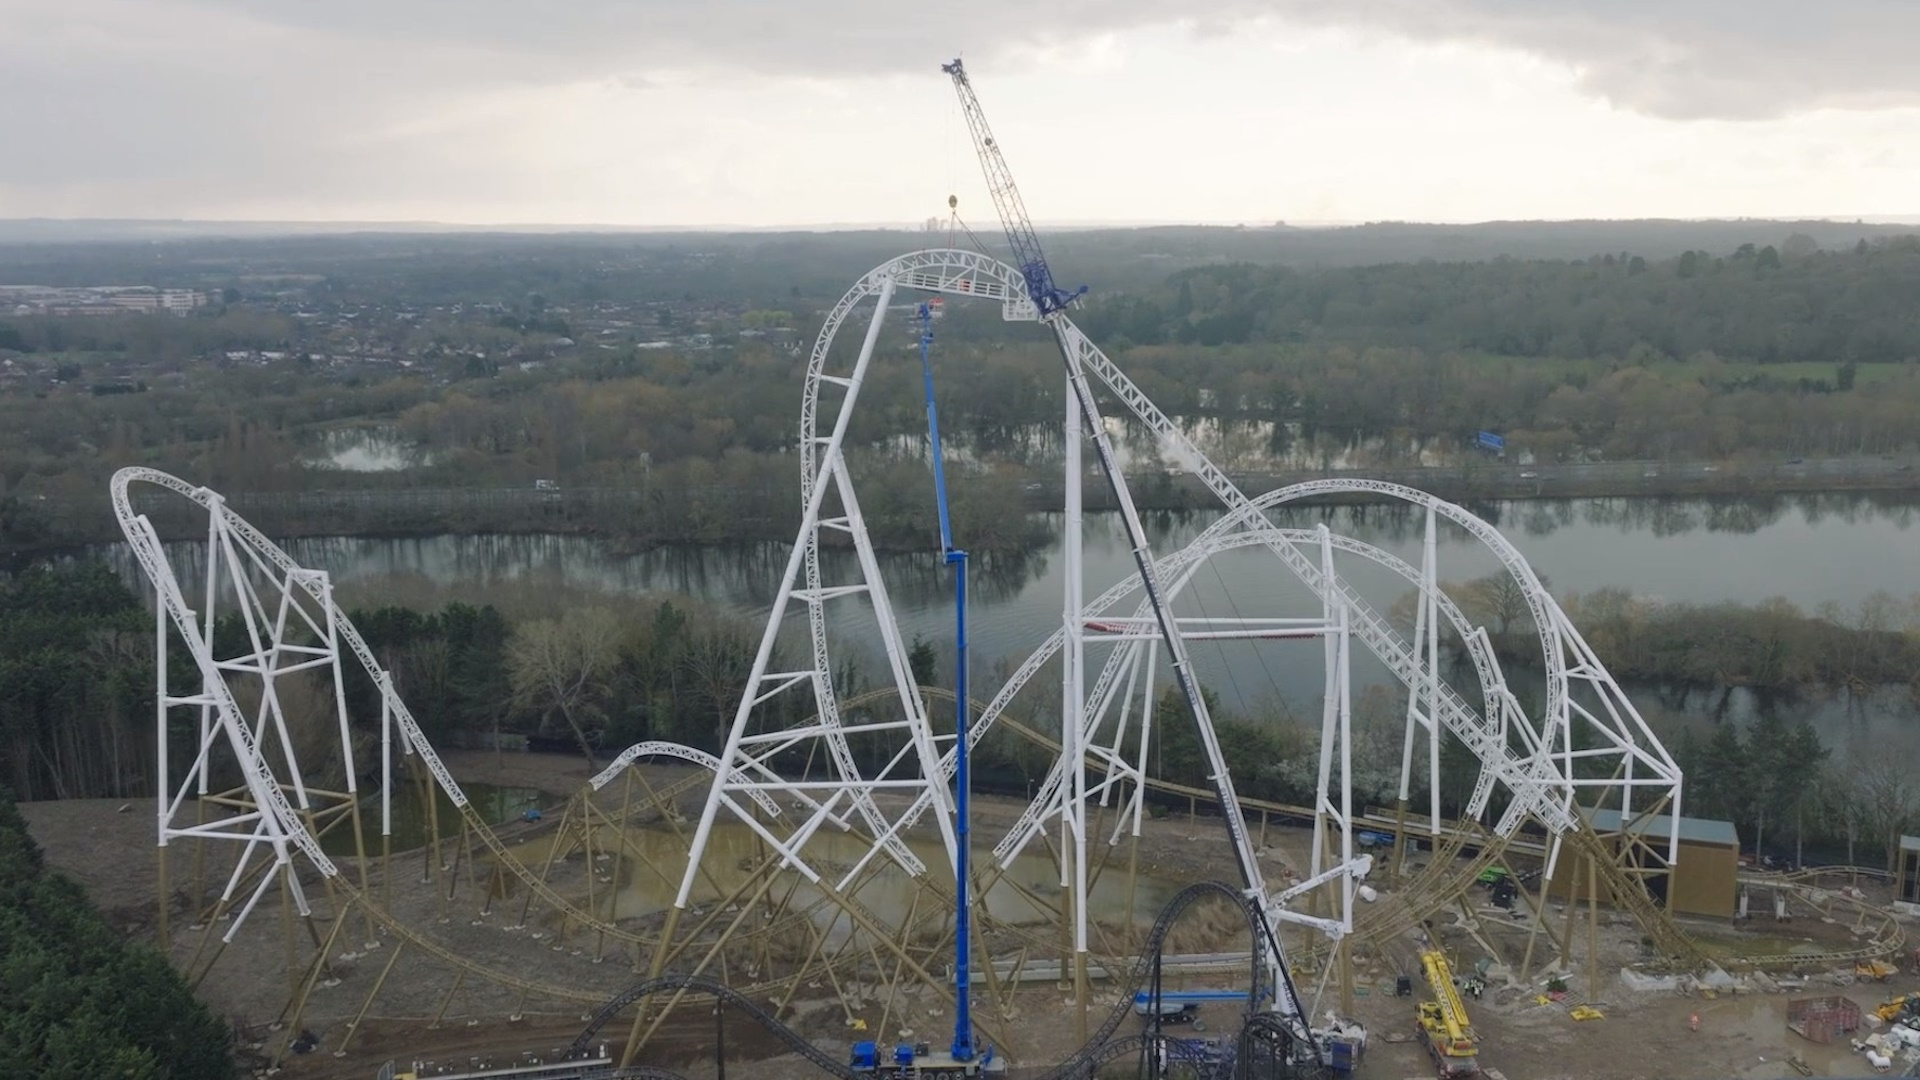 Hyperia - The UKs Tallest and Fastest Roller Coaster